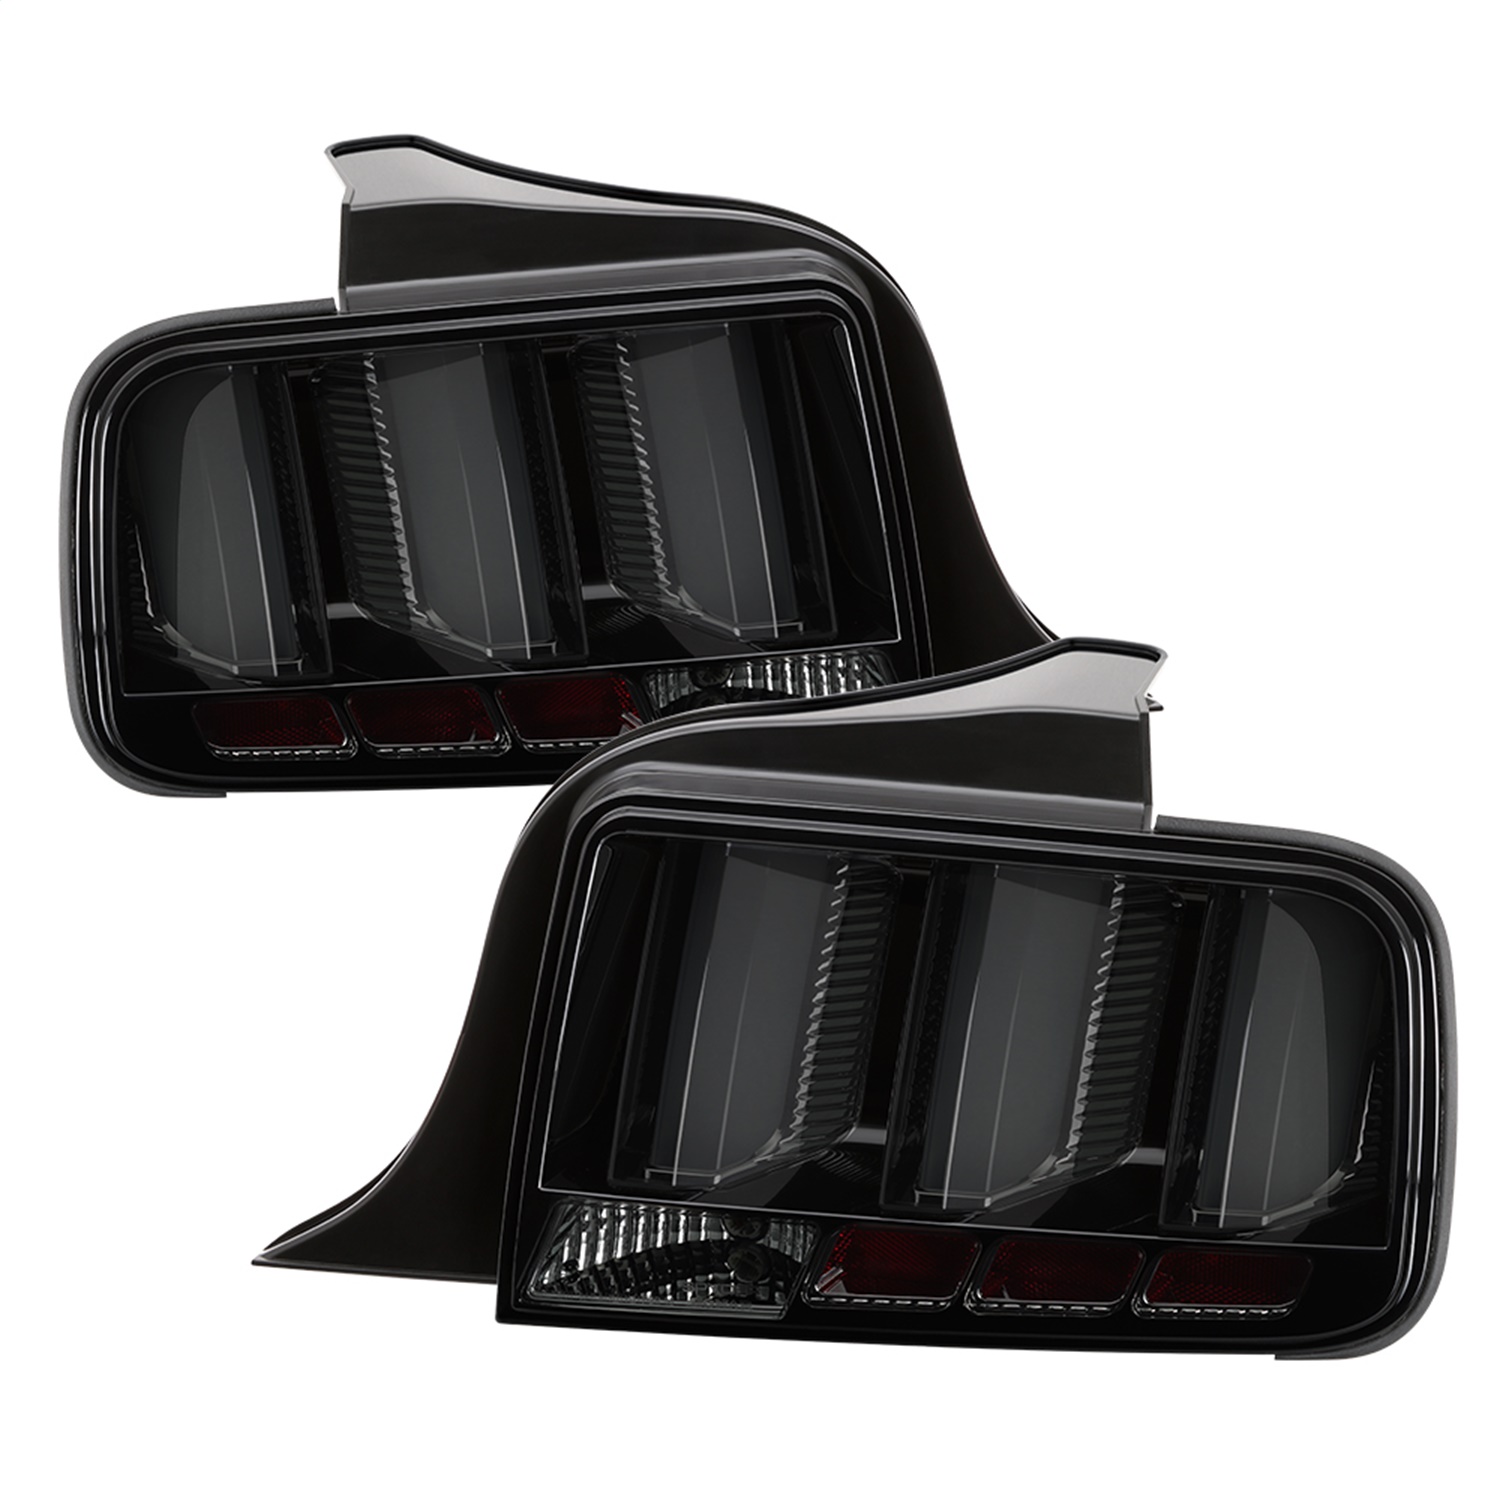 Spyder Auto 5086709 LED Tail Lights Fits 05-09 Mustang